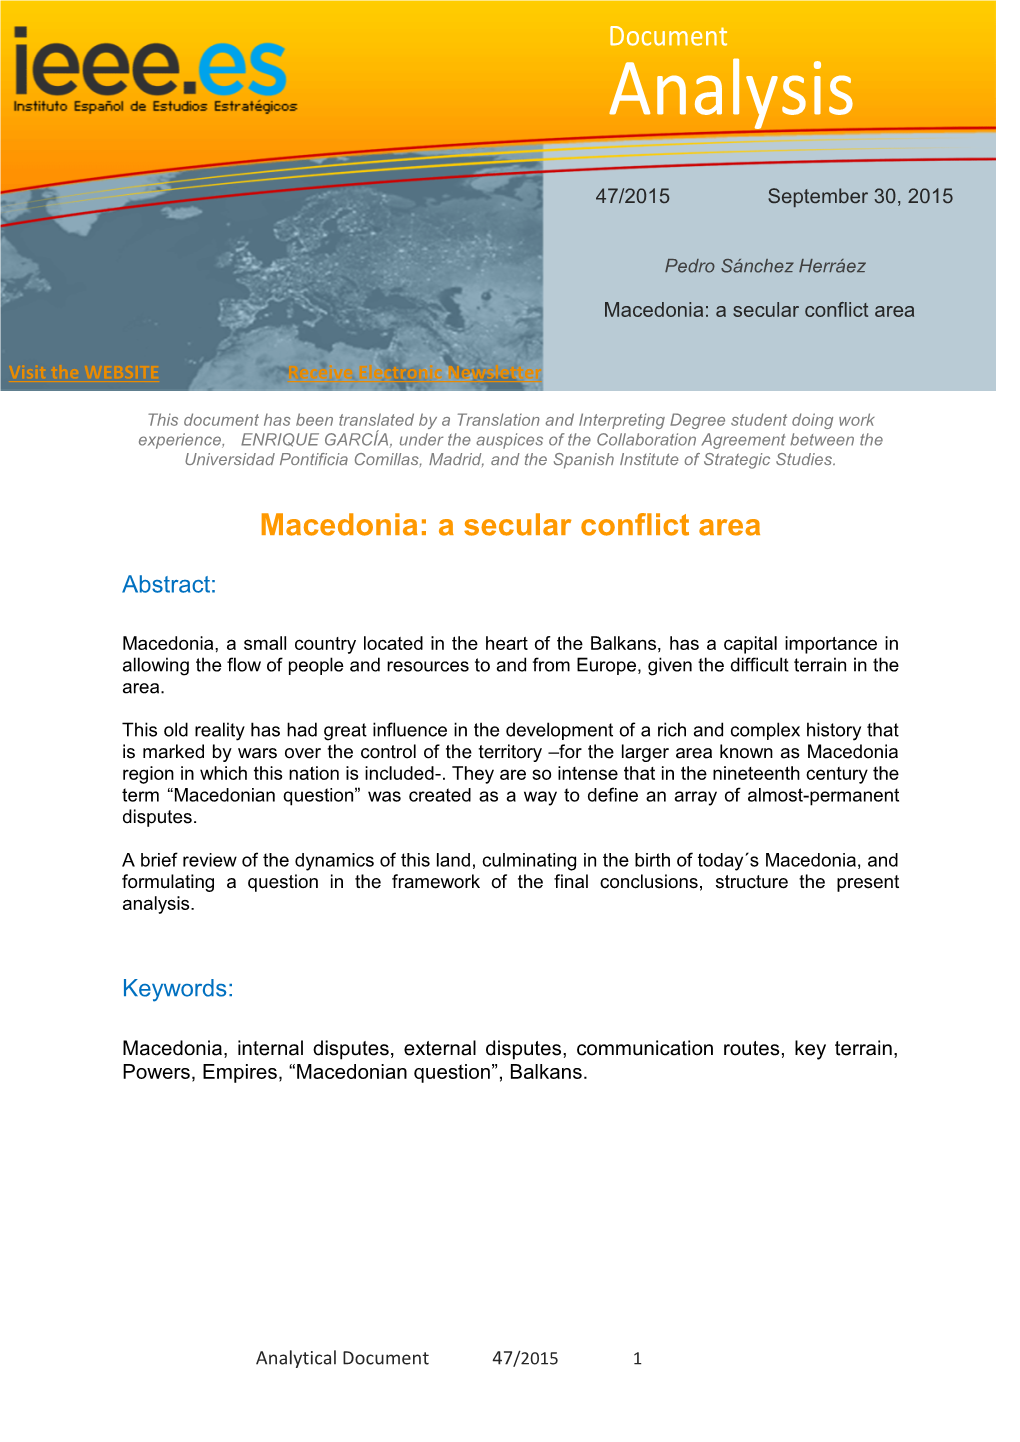 Macedonia: a Secular Conflict Area